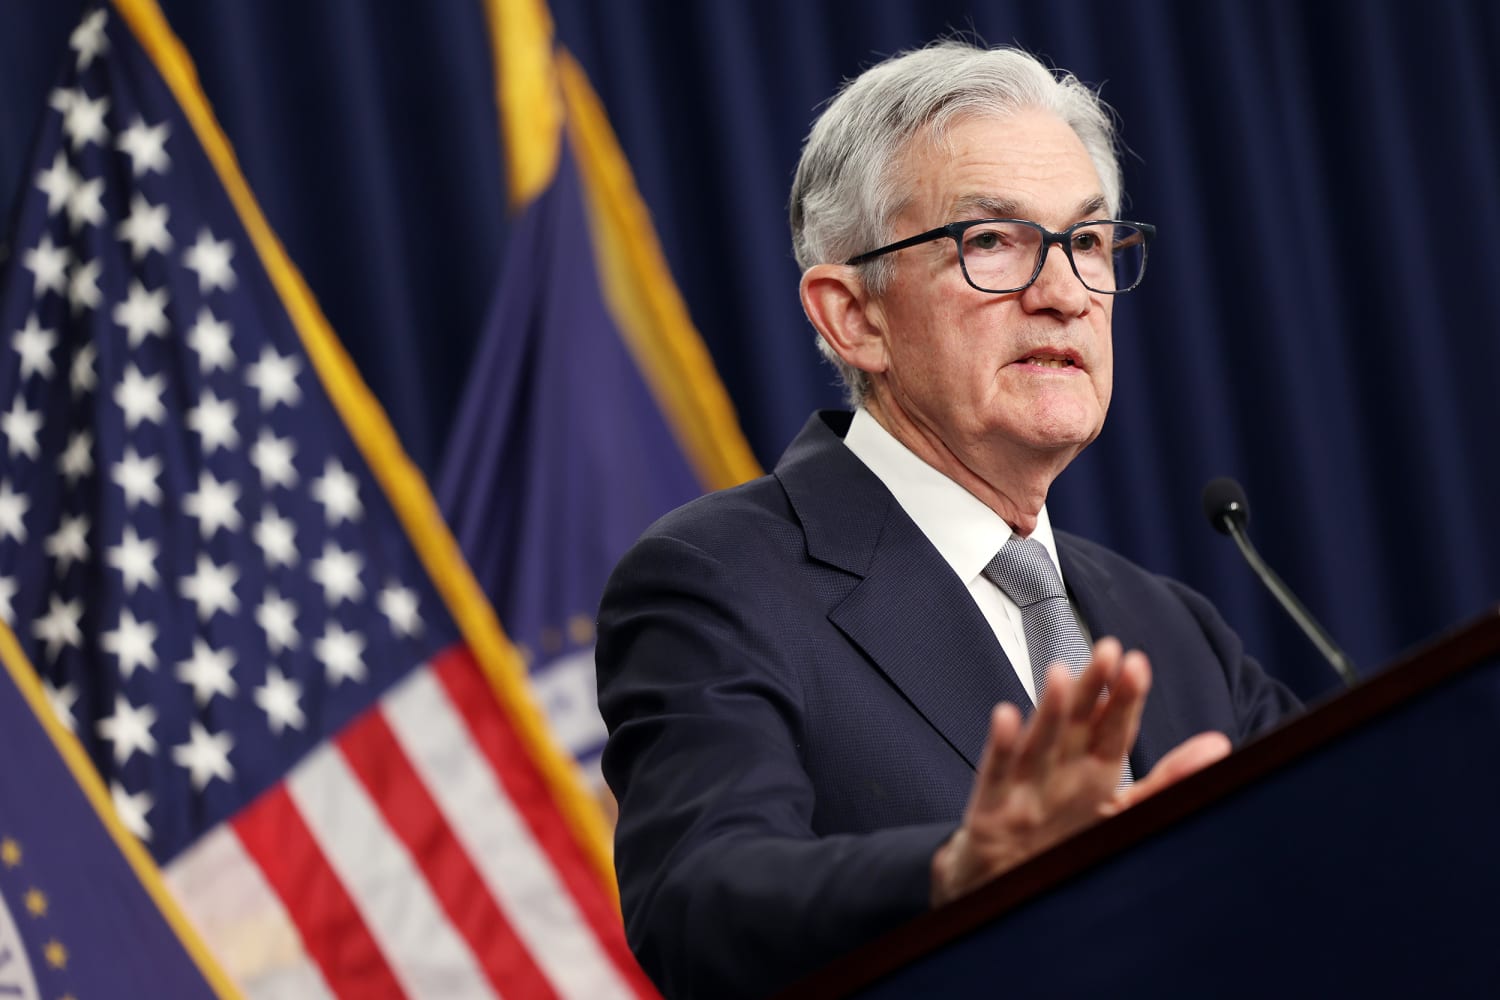 The Federal Reserve is keeping interest rates steady as consumer confidence improves and inflation slows